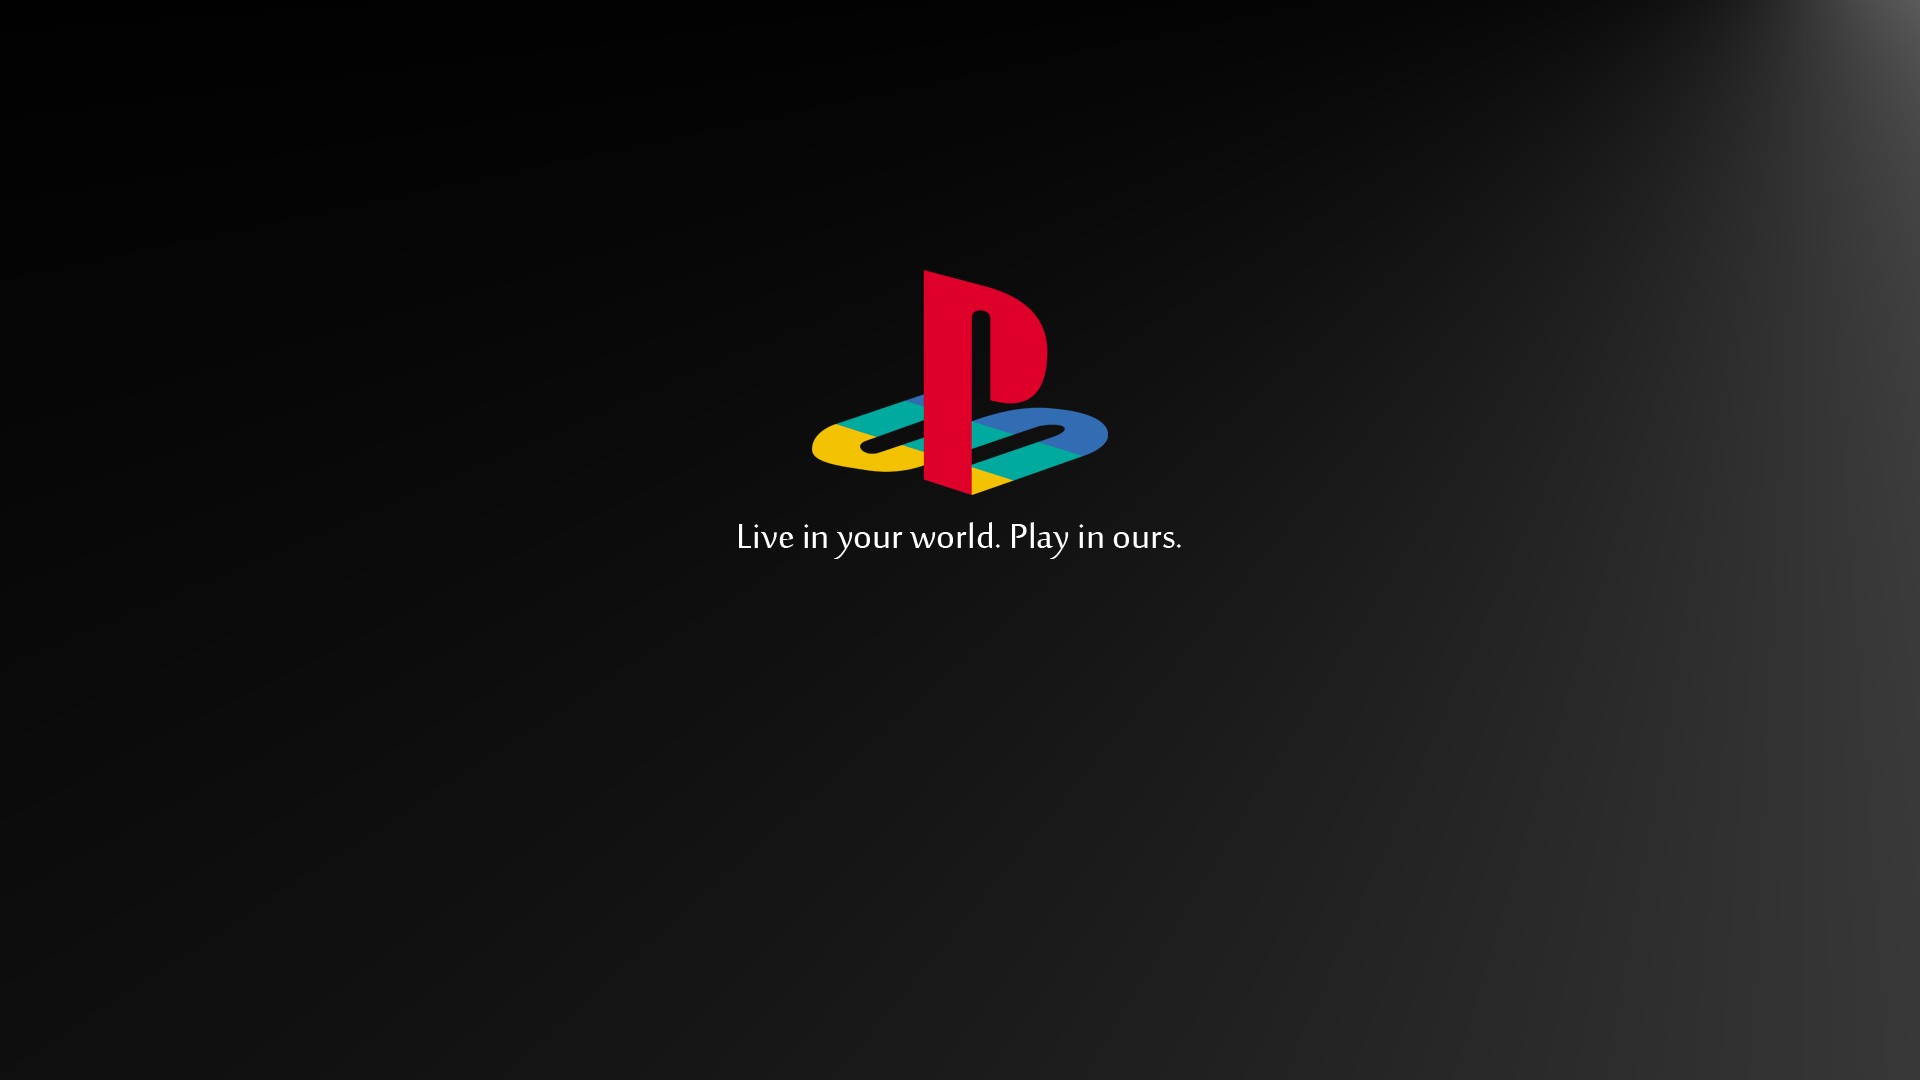 Playstation HD Backgrounds 